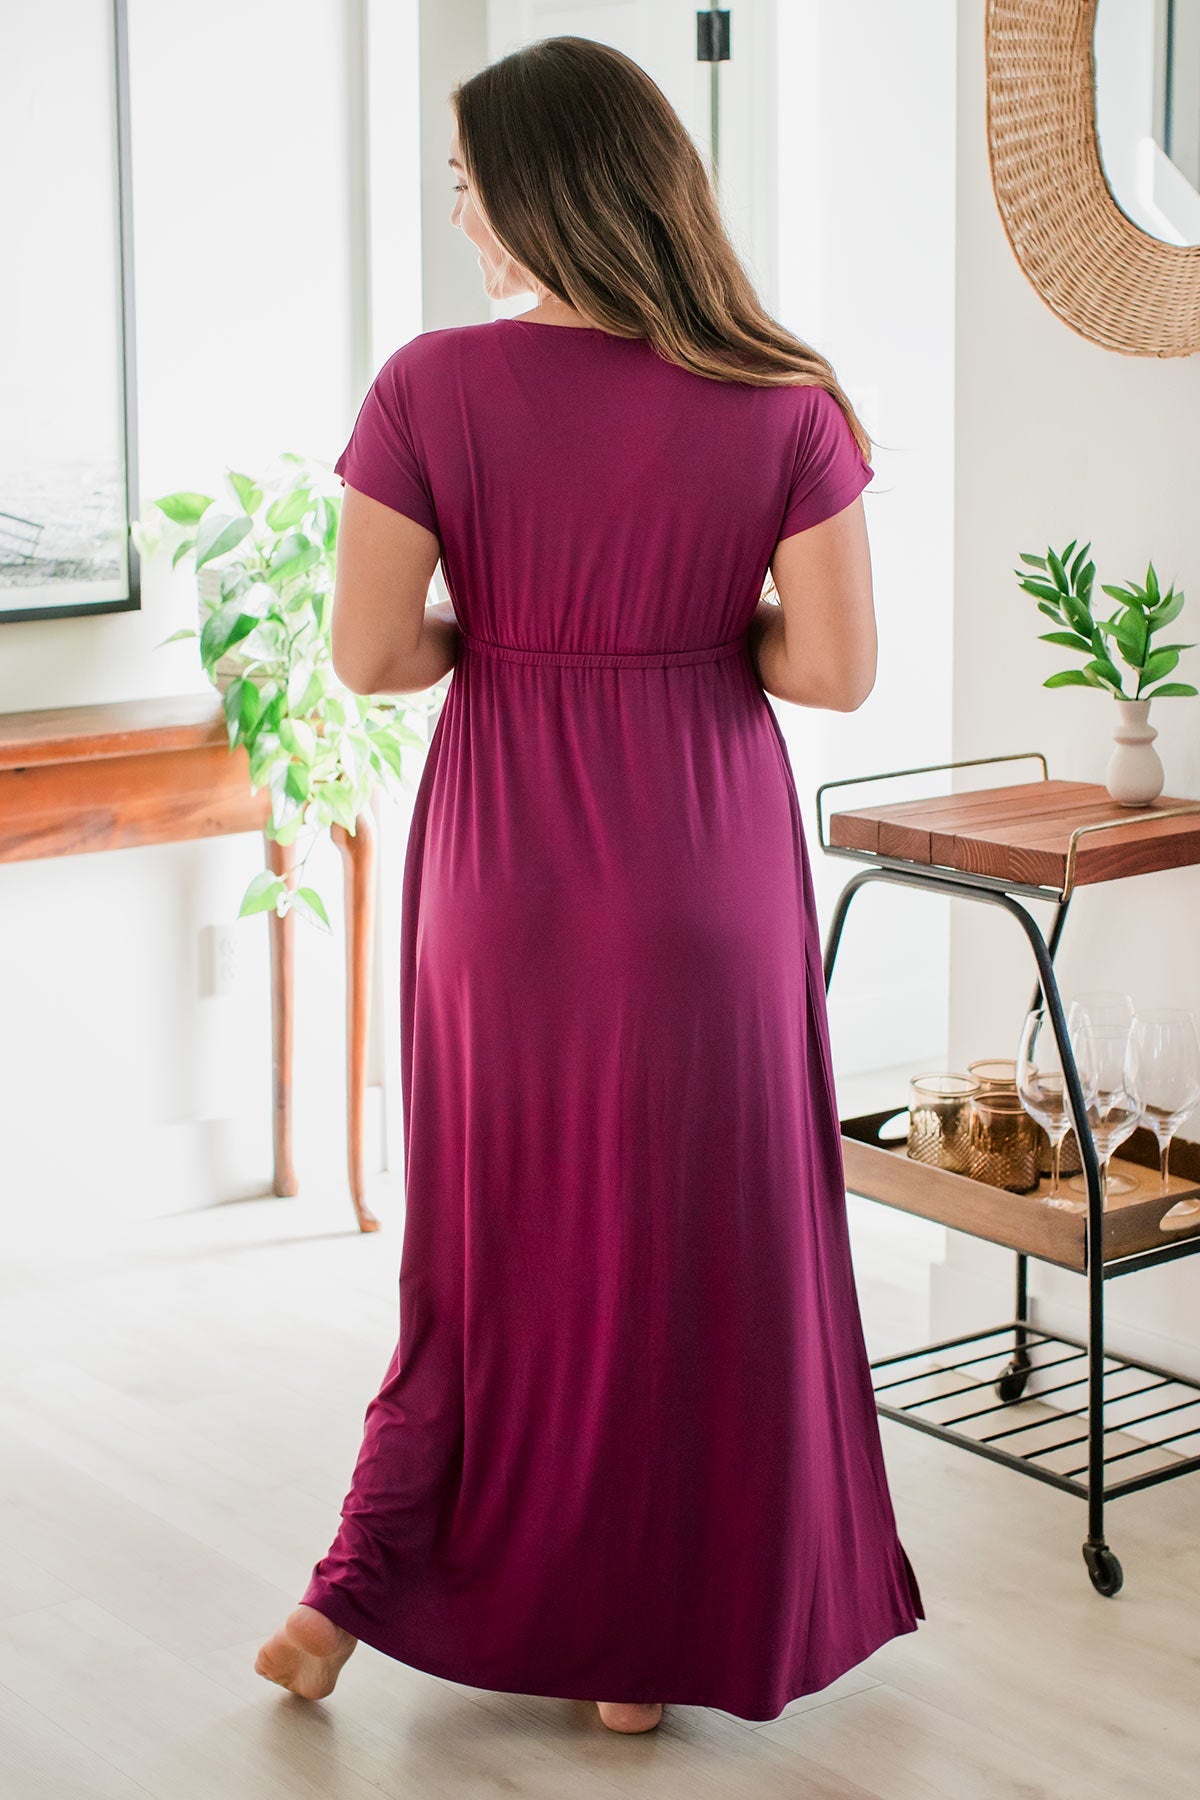 A woman standing with her back to the camera, one foot tilted up on its ball, wearing Zoey Crossover Bamboo Maxi Dress in Boysenberry